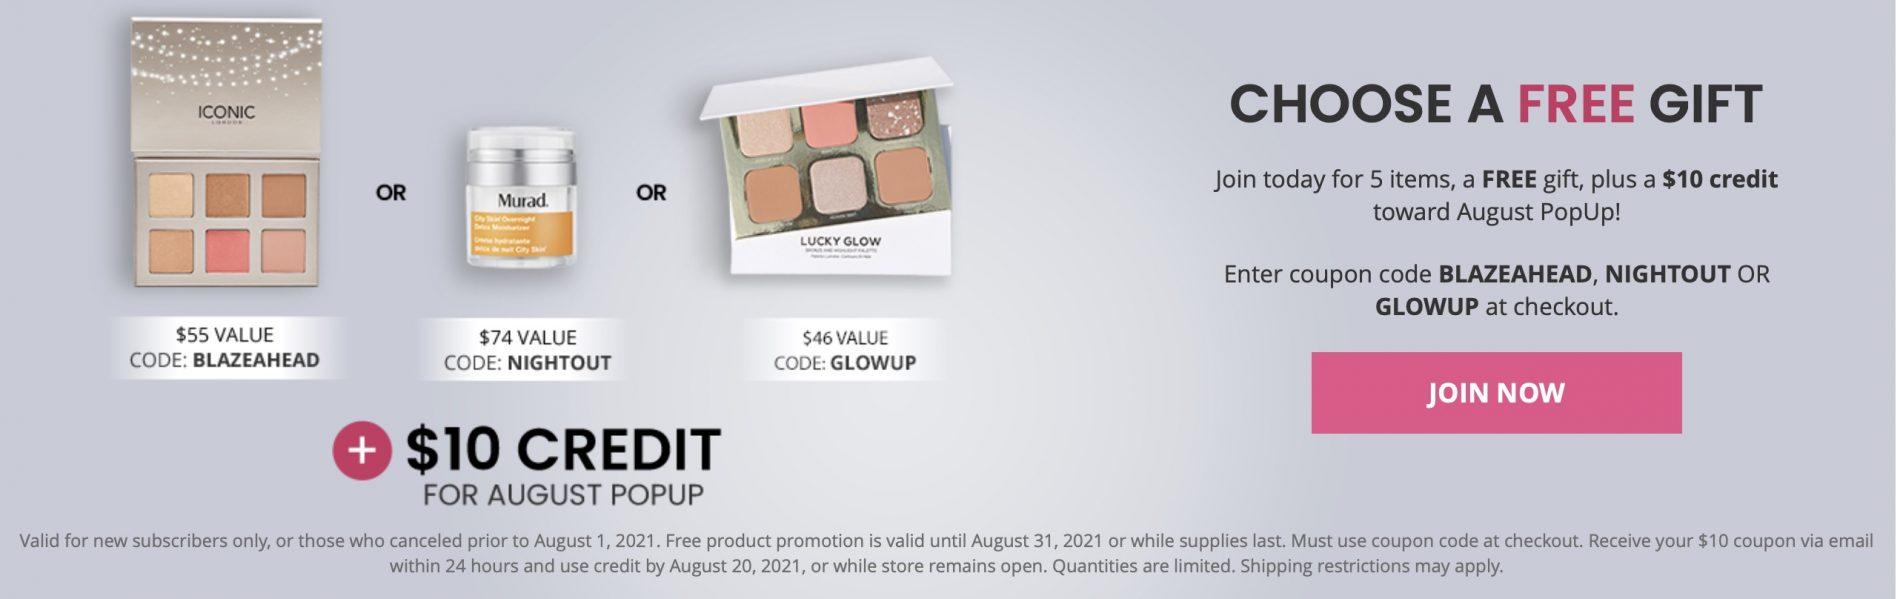 BOXYCHARM August 2021 Coupon Code – Free Gift with Purchase + $10 Pop-Up Credit!